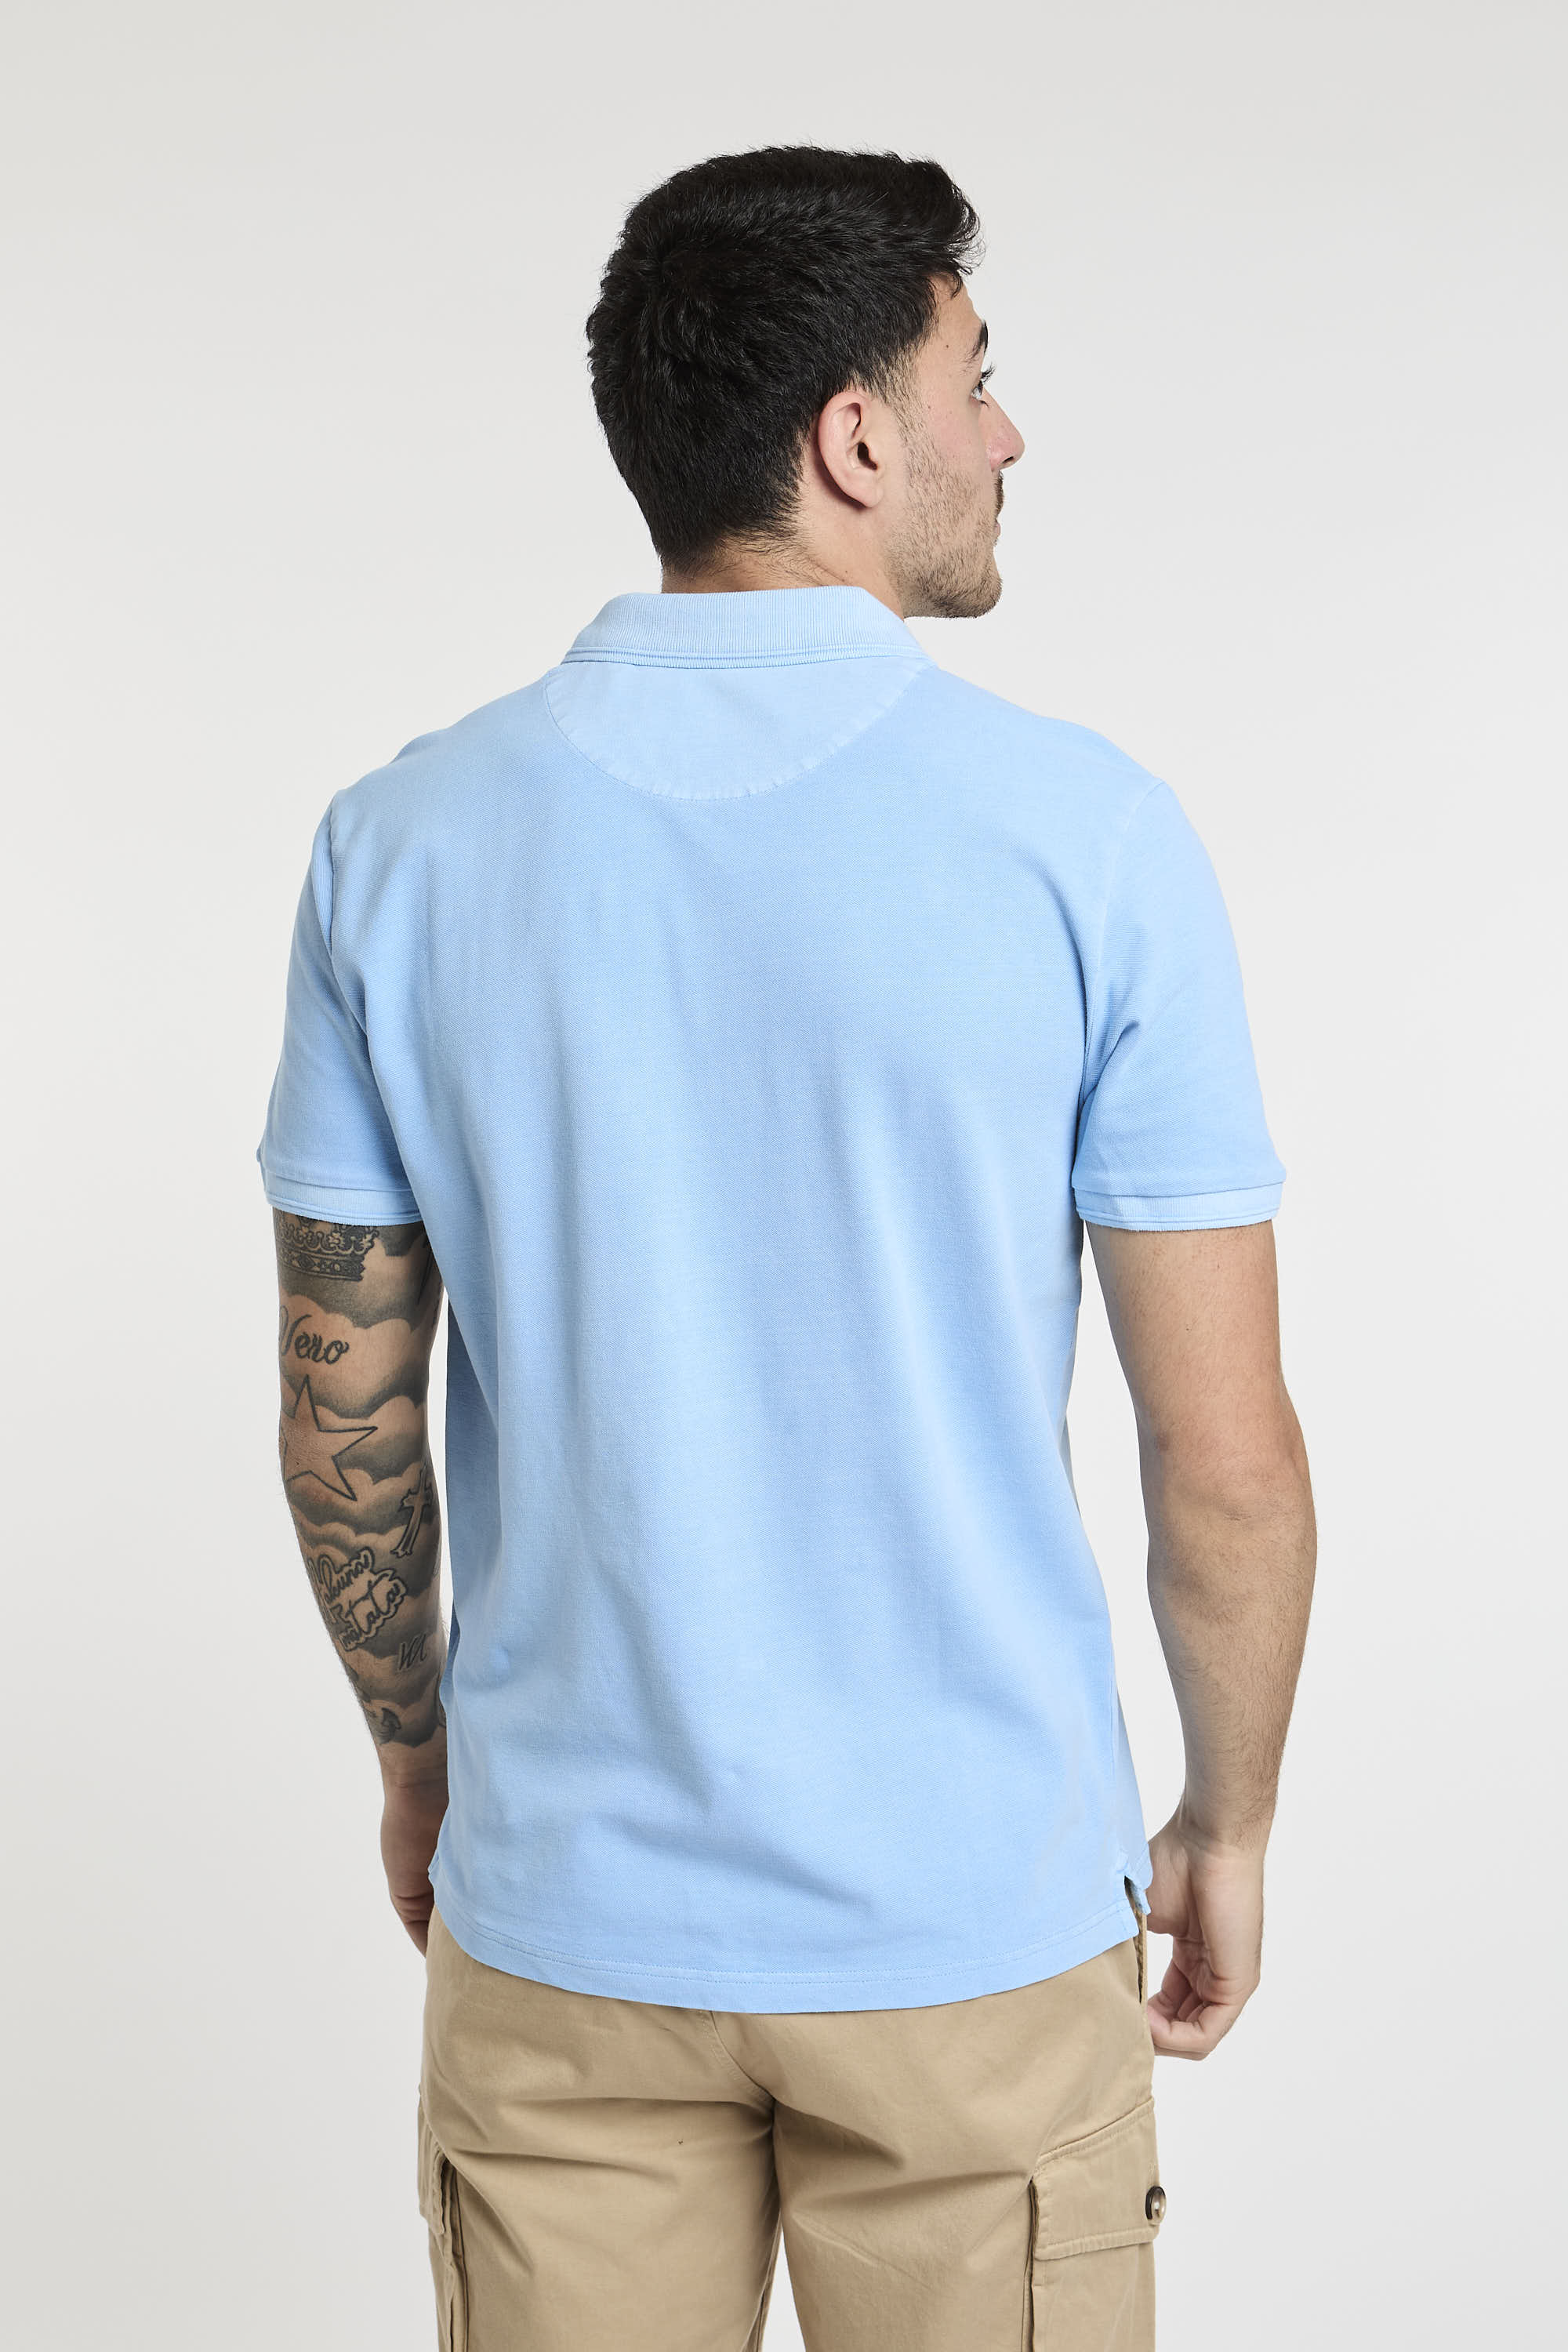 Woolrich Mackinack Piqué Stretch Cotton Polo in Light Blue-5